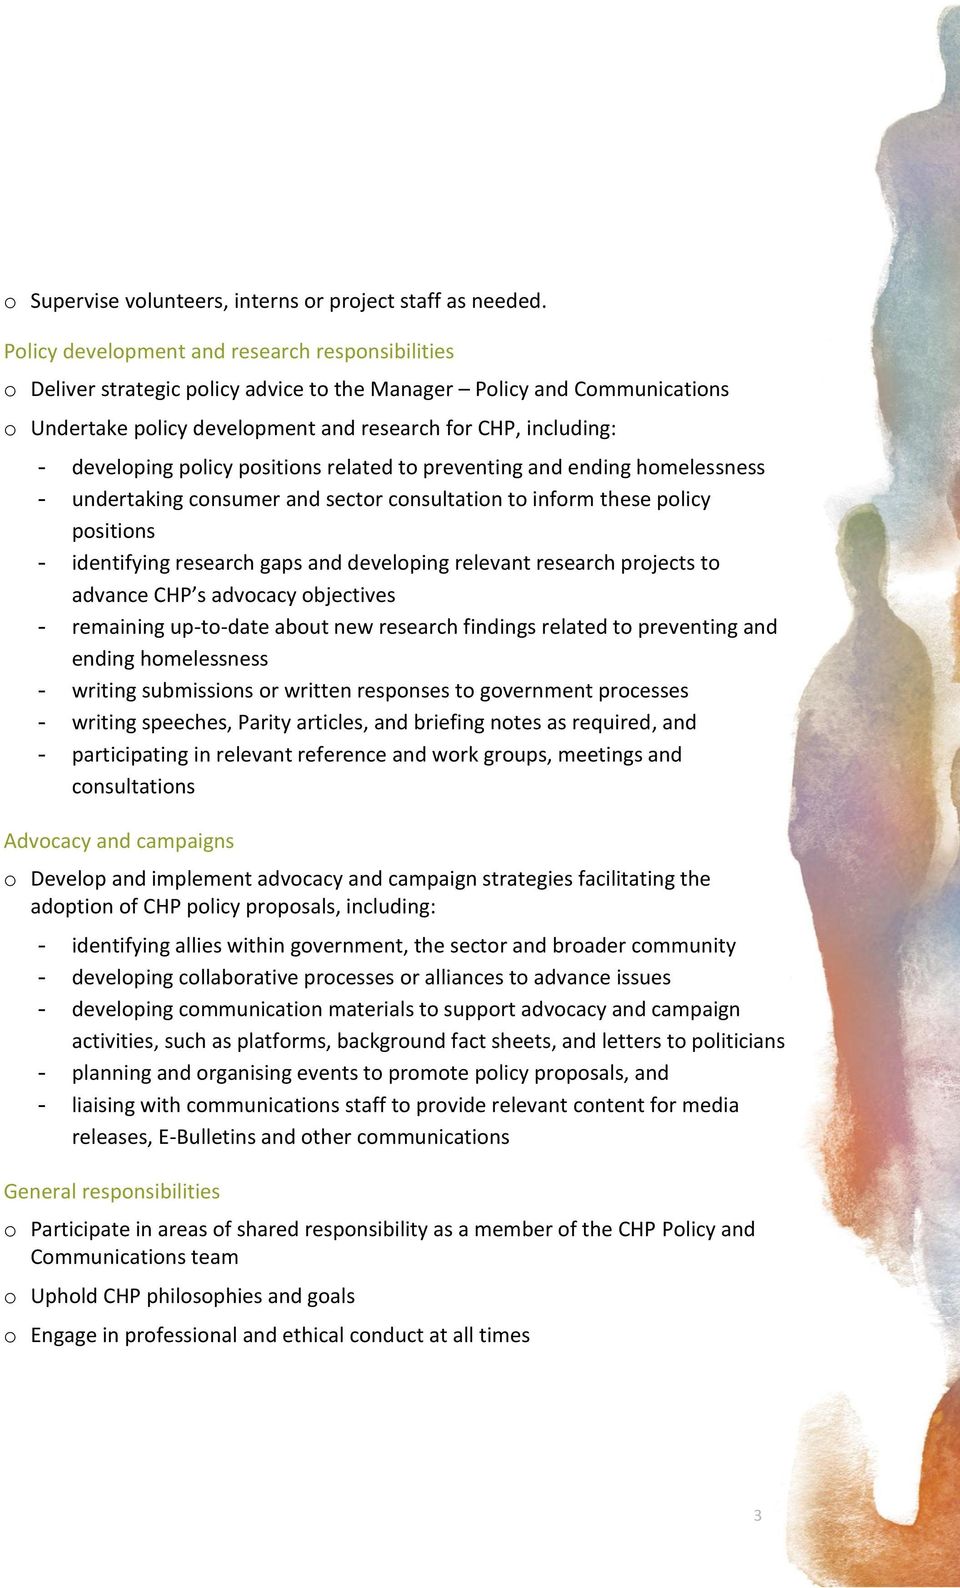 developing policy positions related to preventing and ending homelessness - undertaking consumer and sector consultation to inform these policy positions - identifying research gaps and developing